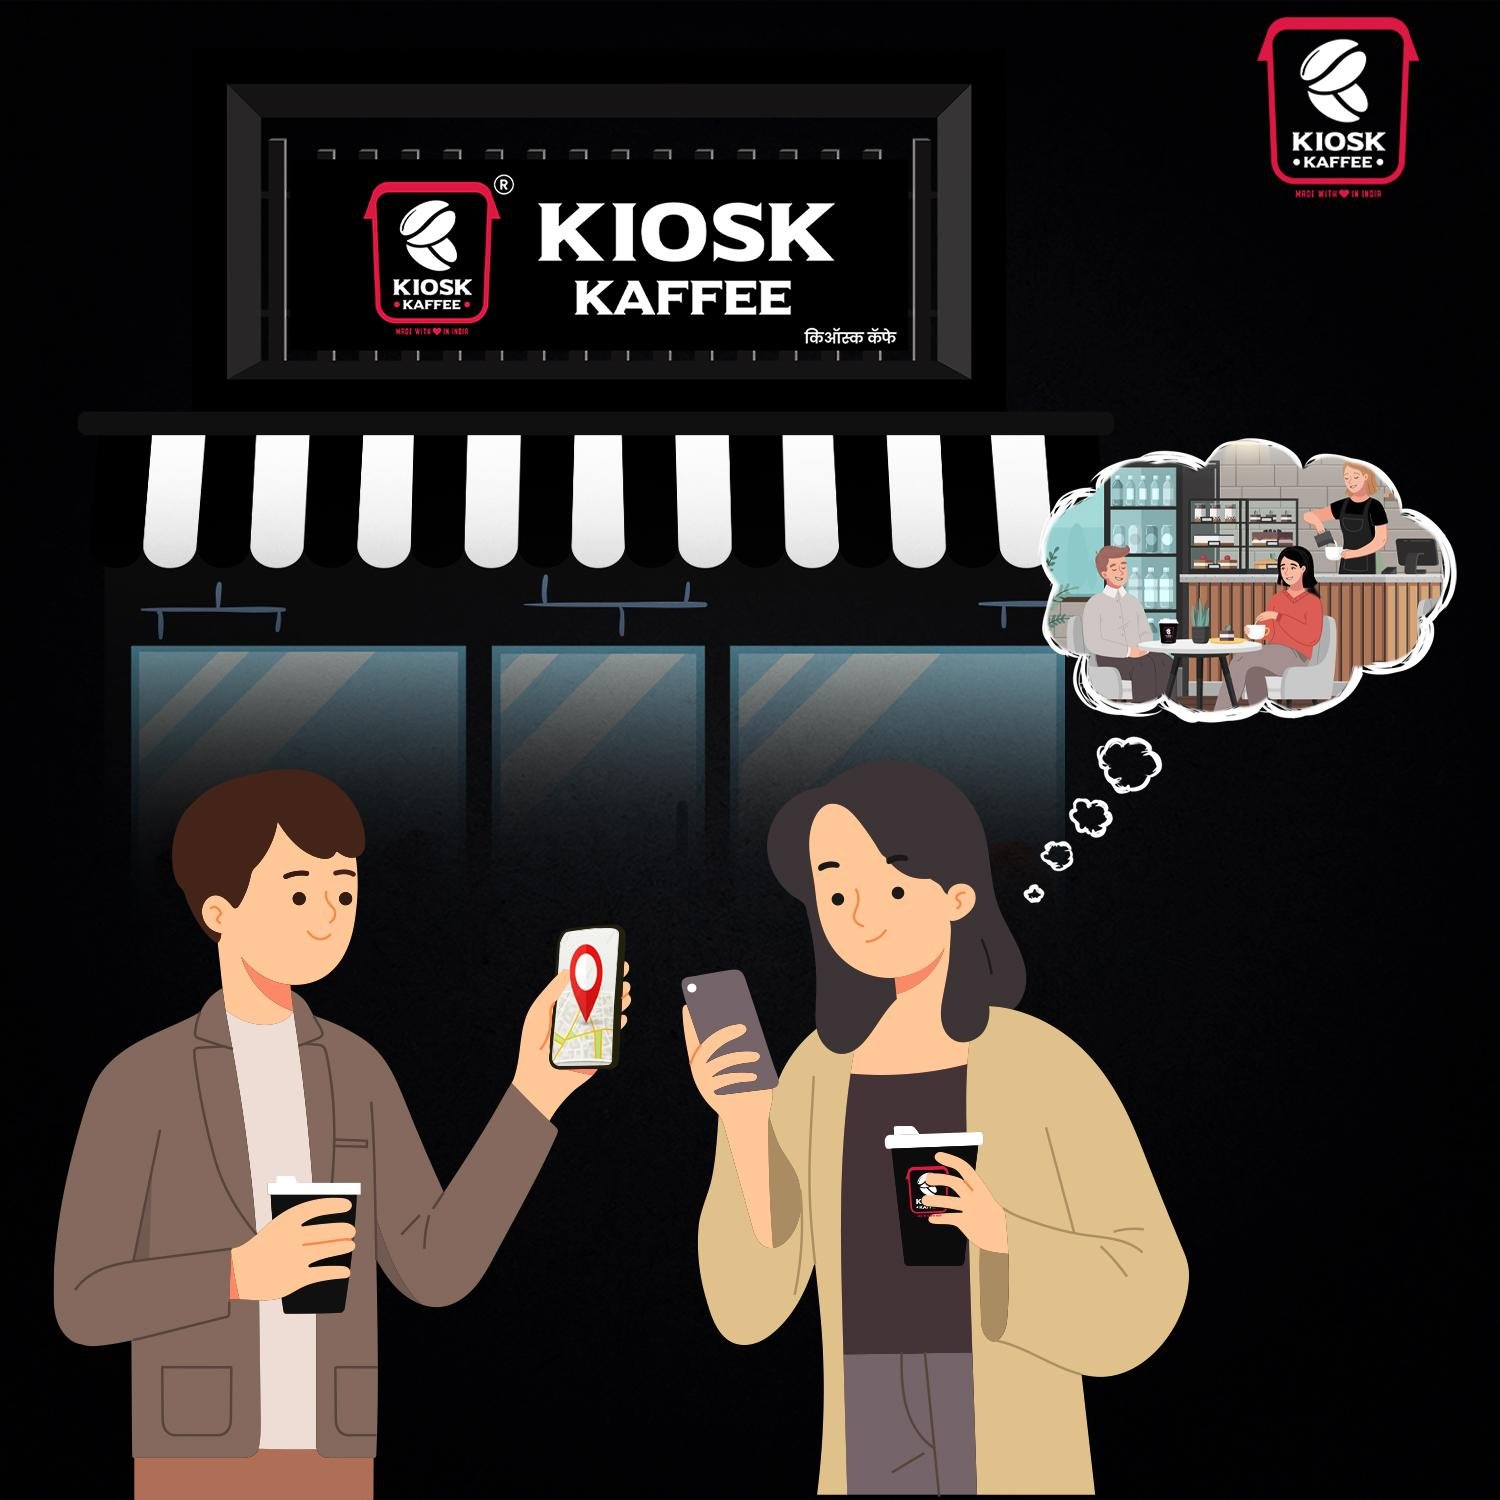 Looking At The Best Coffee Shop For First Date With Your Loved One? Kiosk Kaffee Got You!